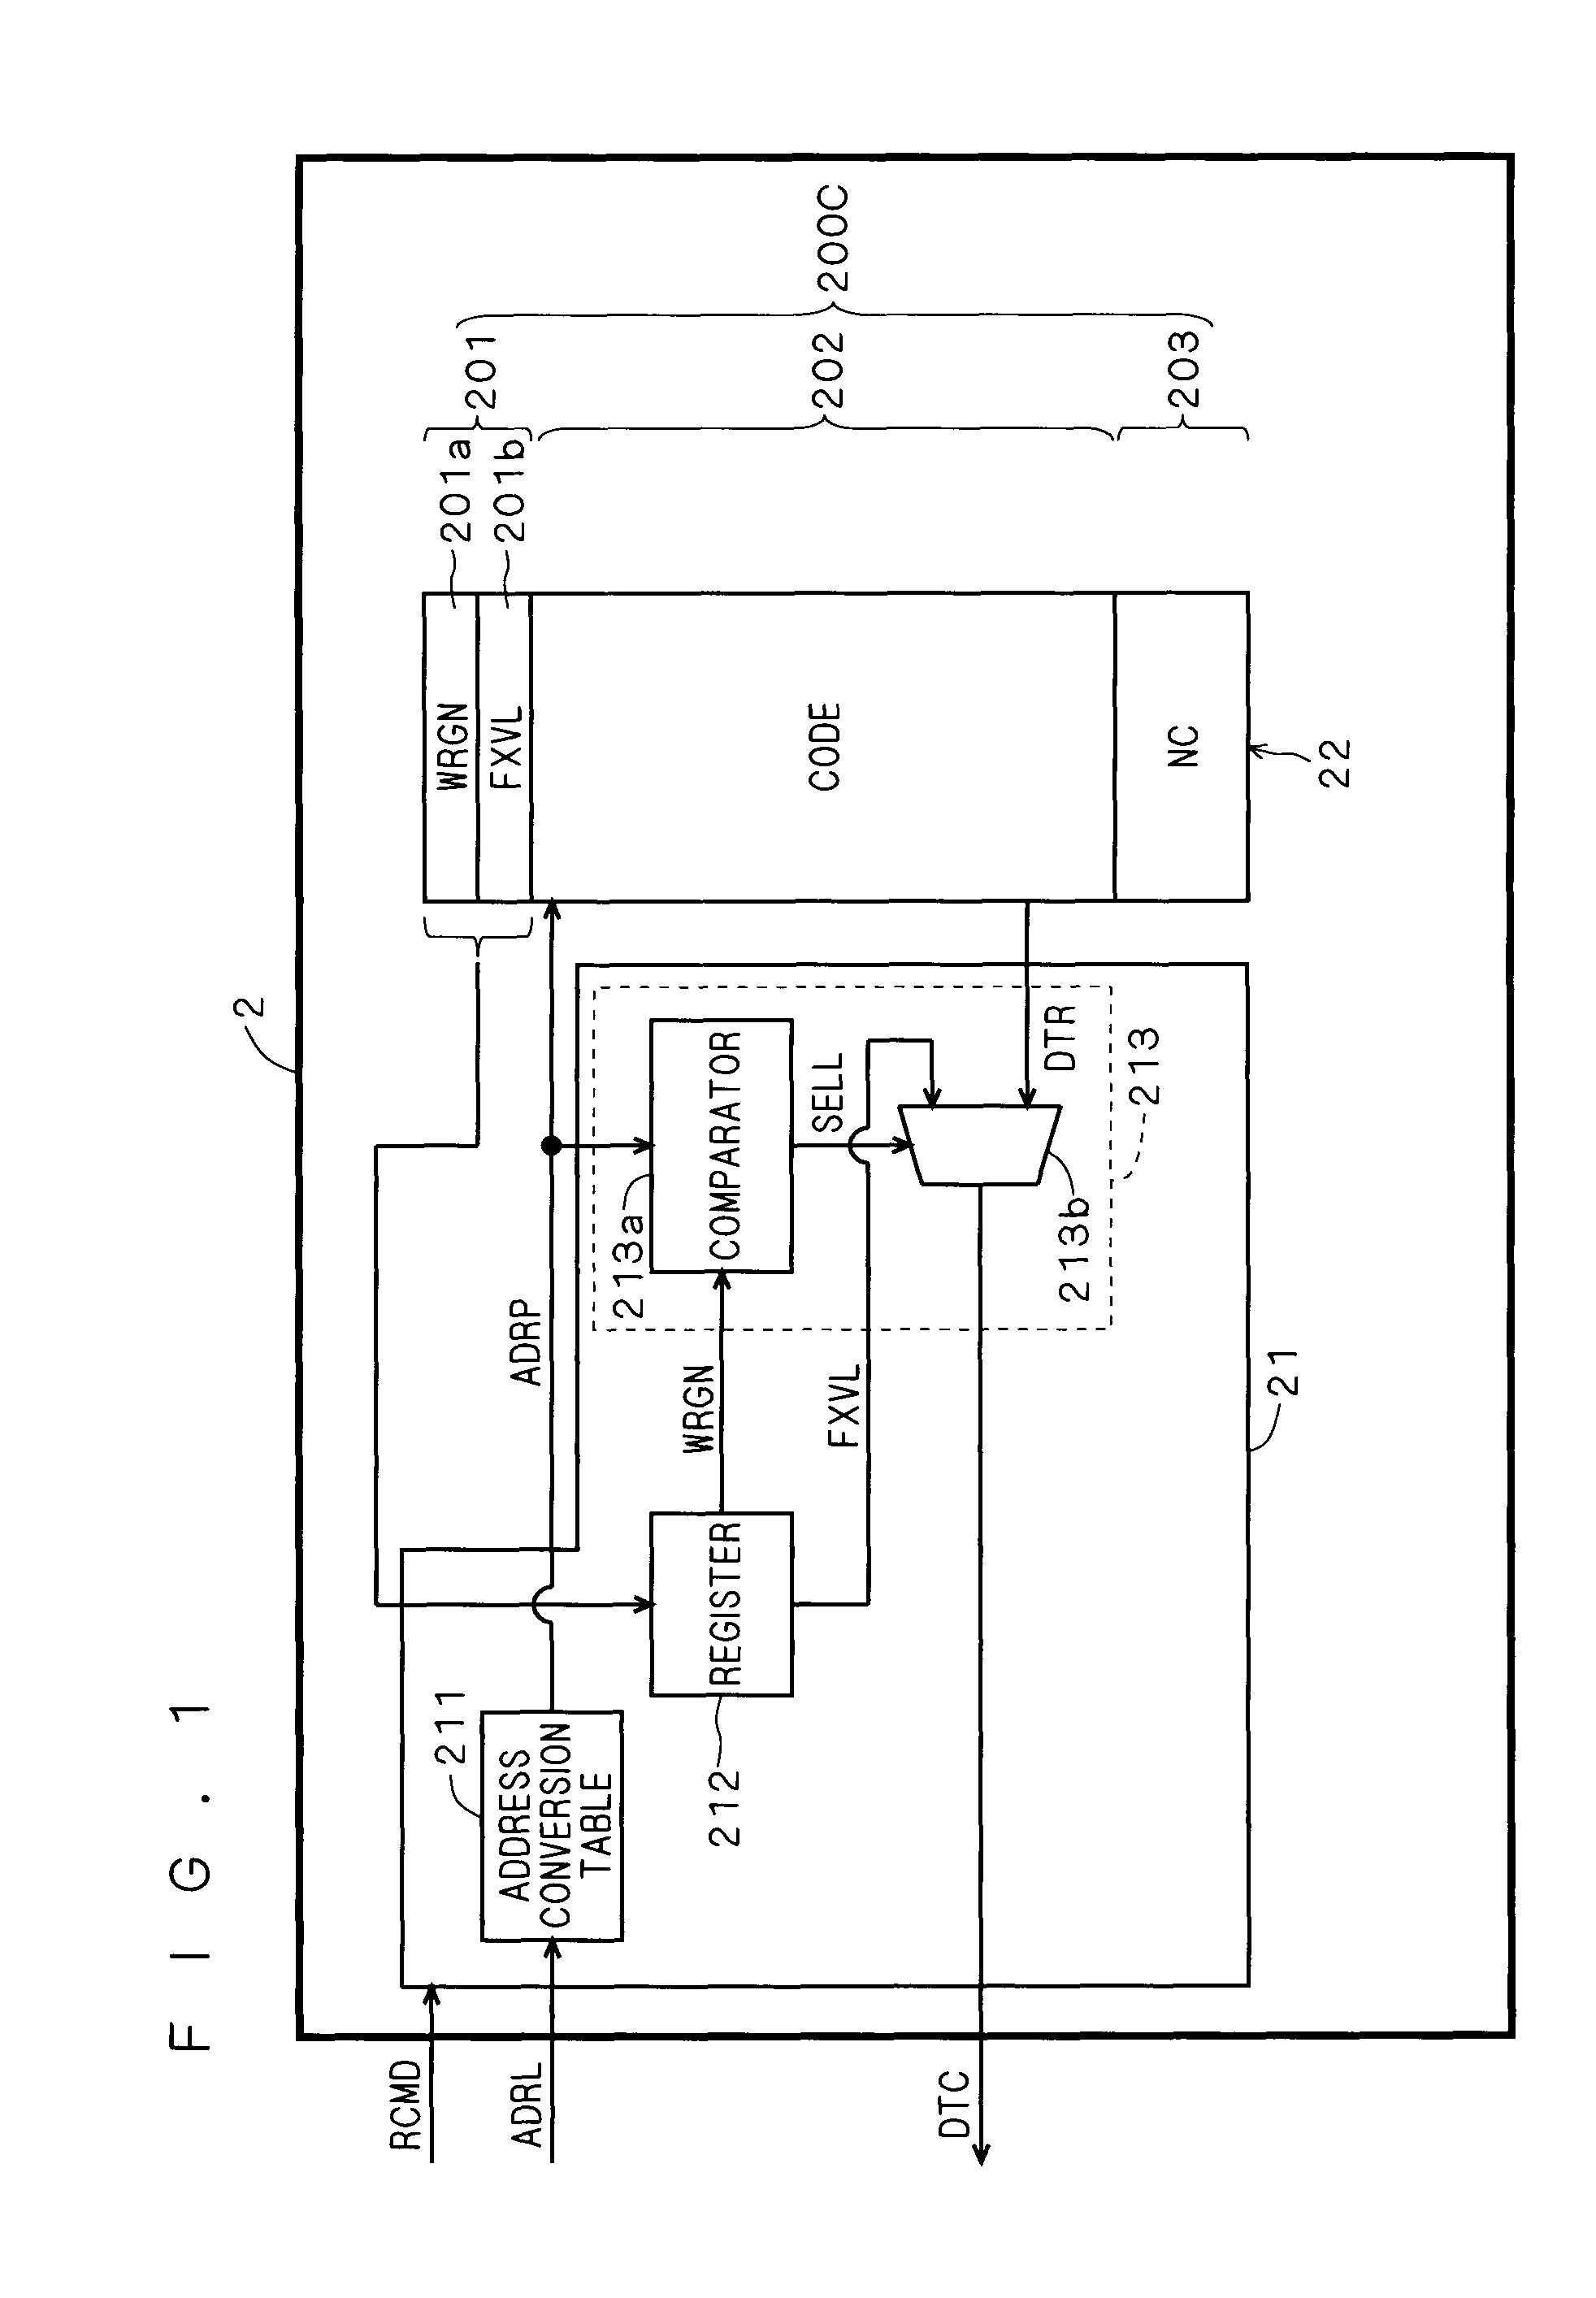 Storage device and data output circuit